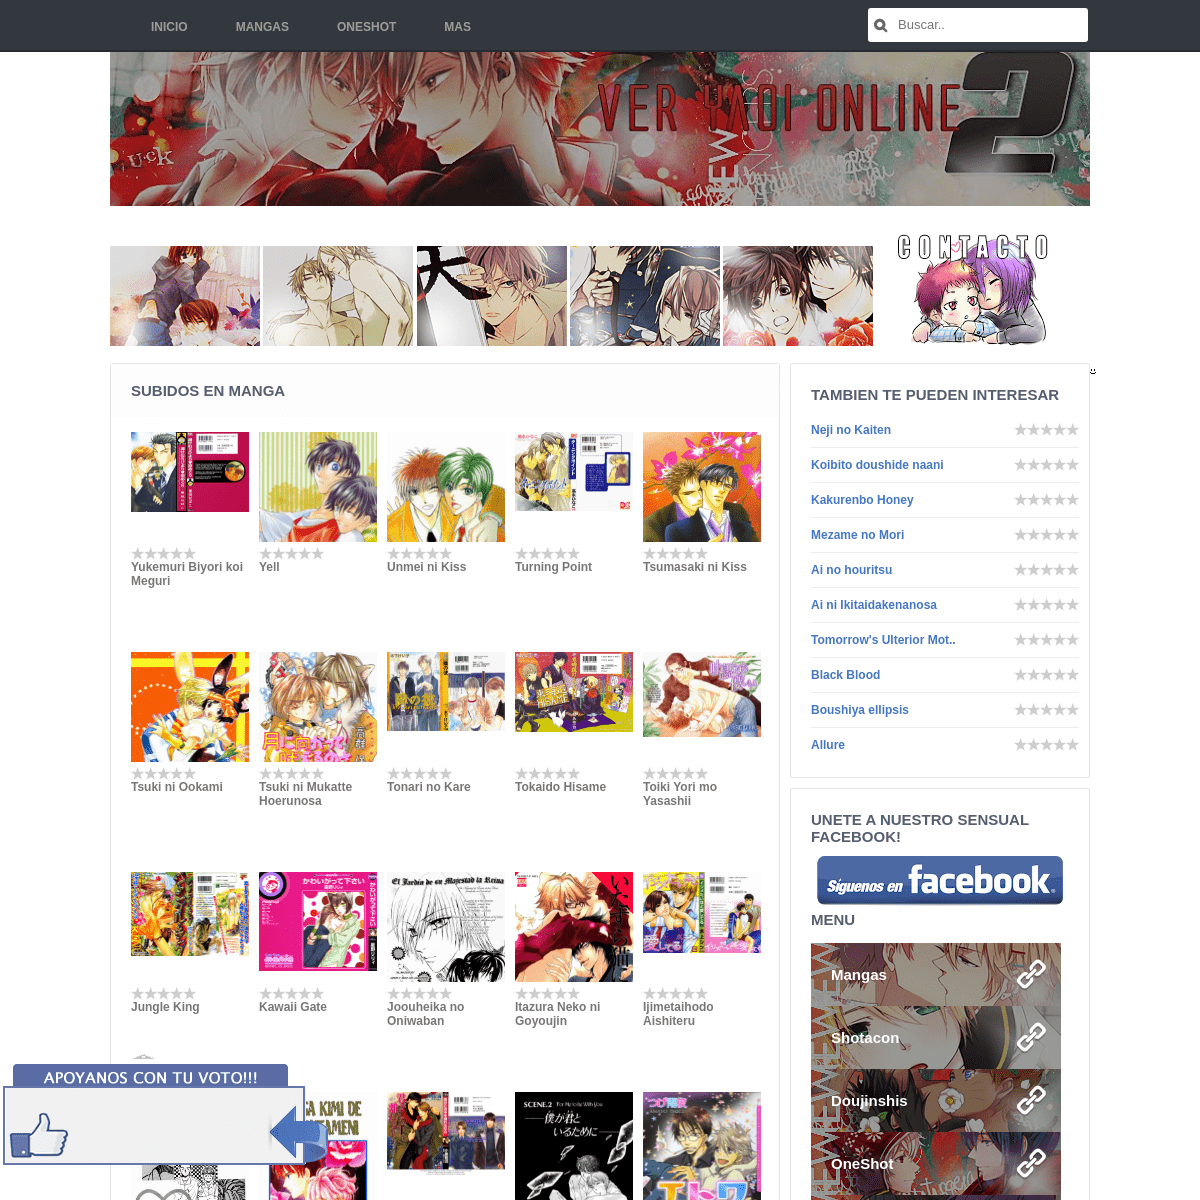 A complete backup of http://veryaoionline.net/categoria/manga/page/33